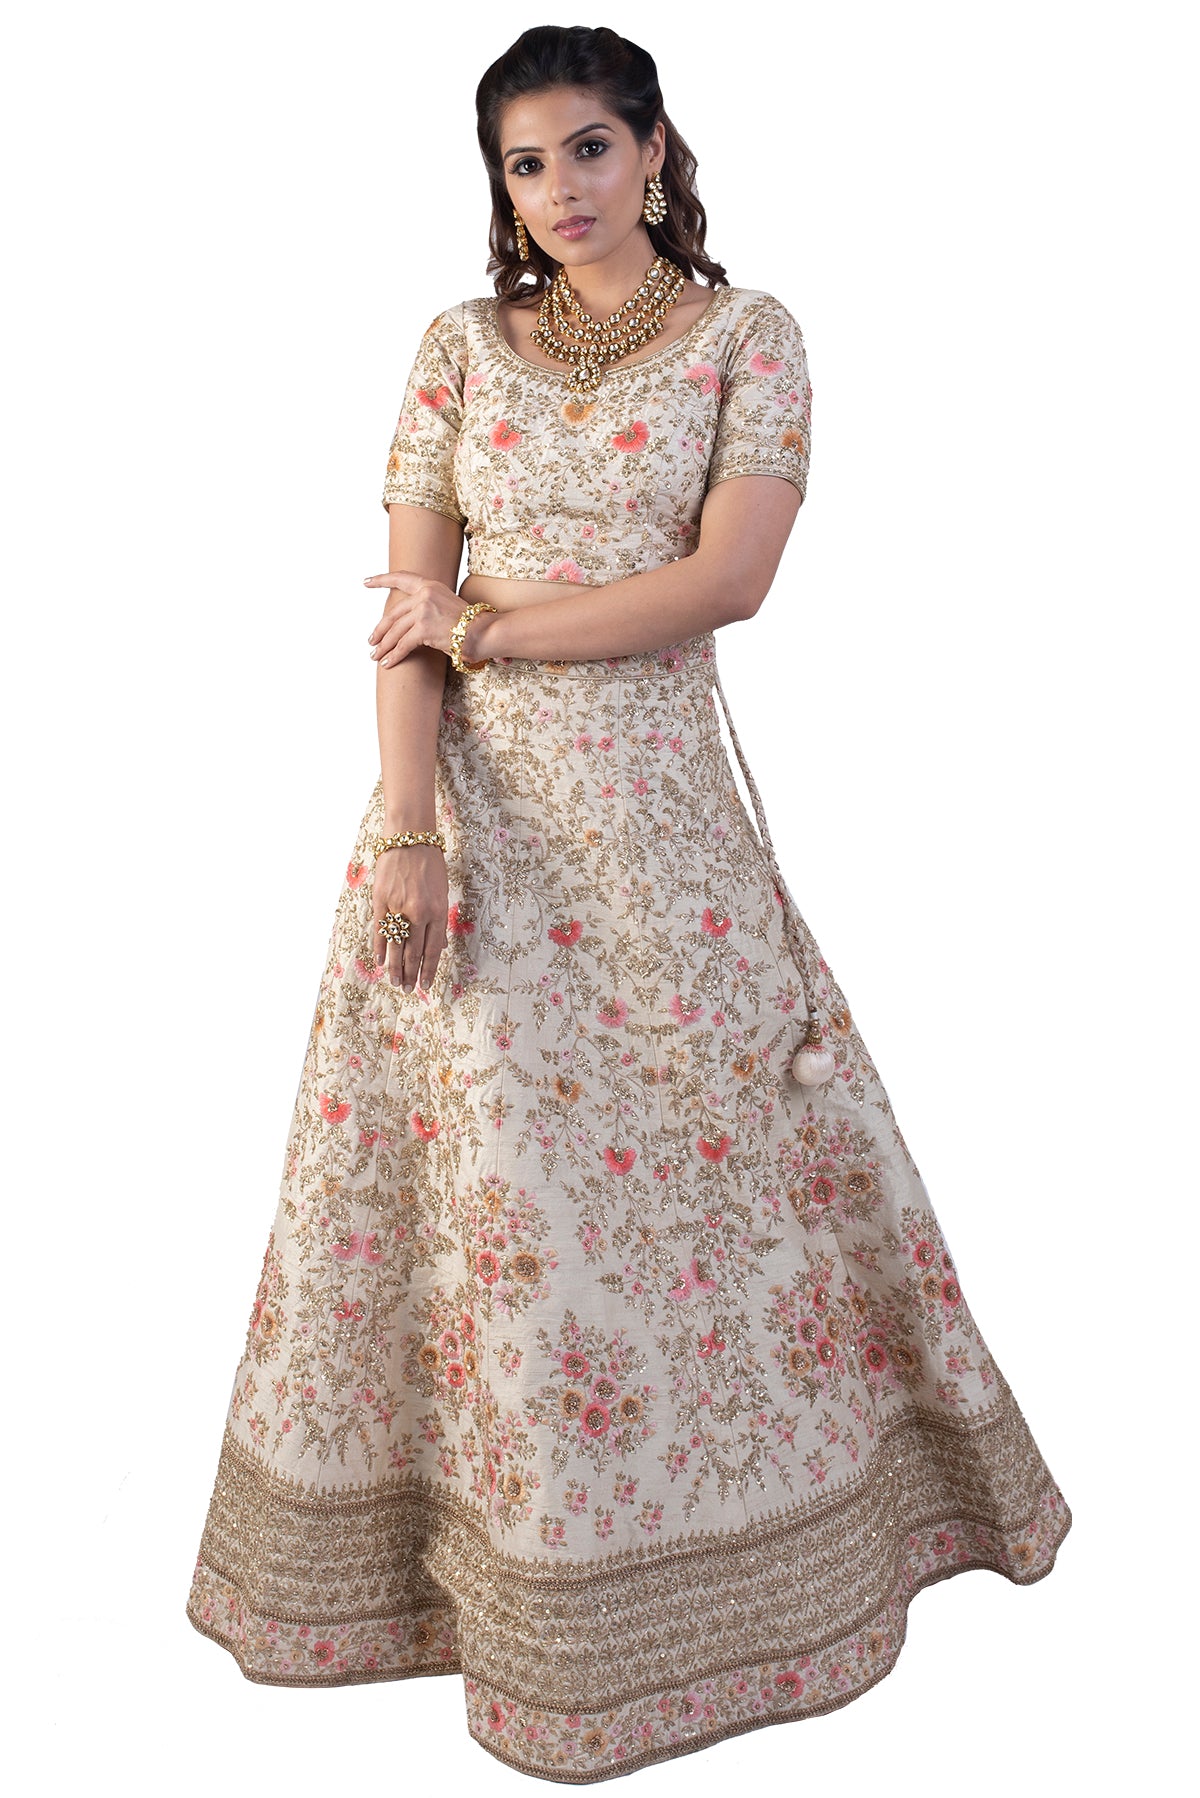 White Lehenga Set With Floral Embroidery